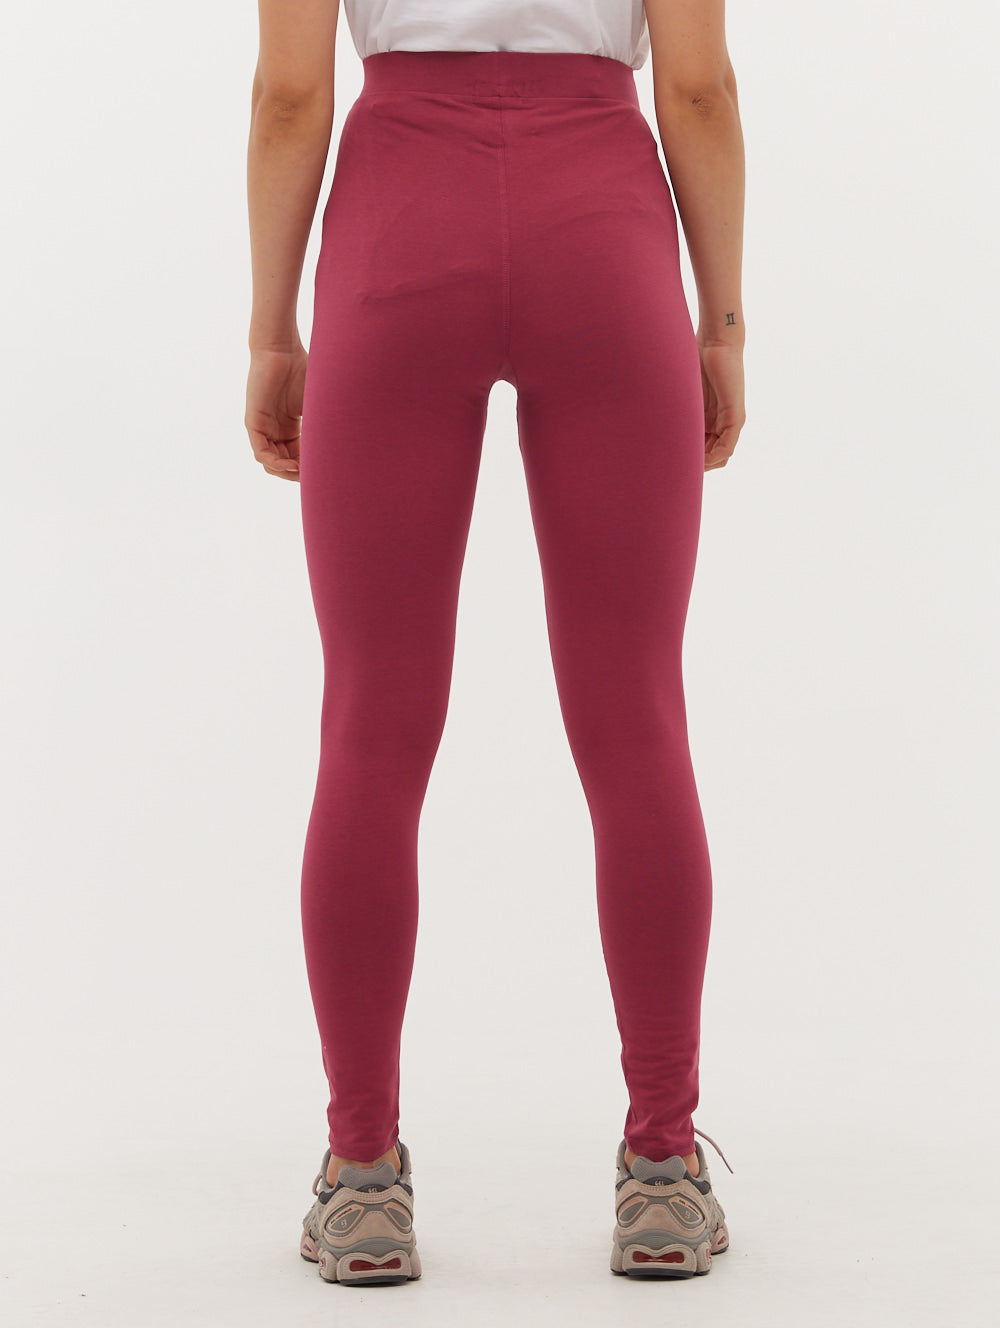 Shop the ZW Varsity High Waisted Crop Leggings for a slimming